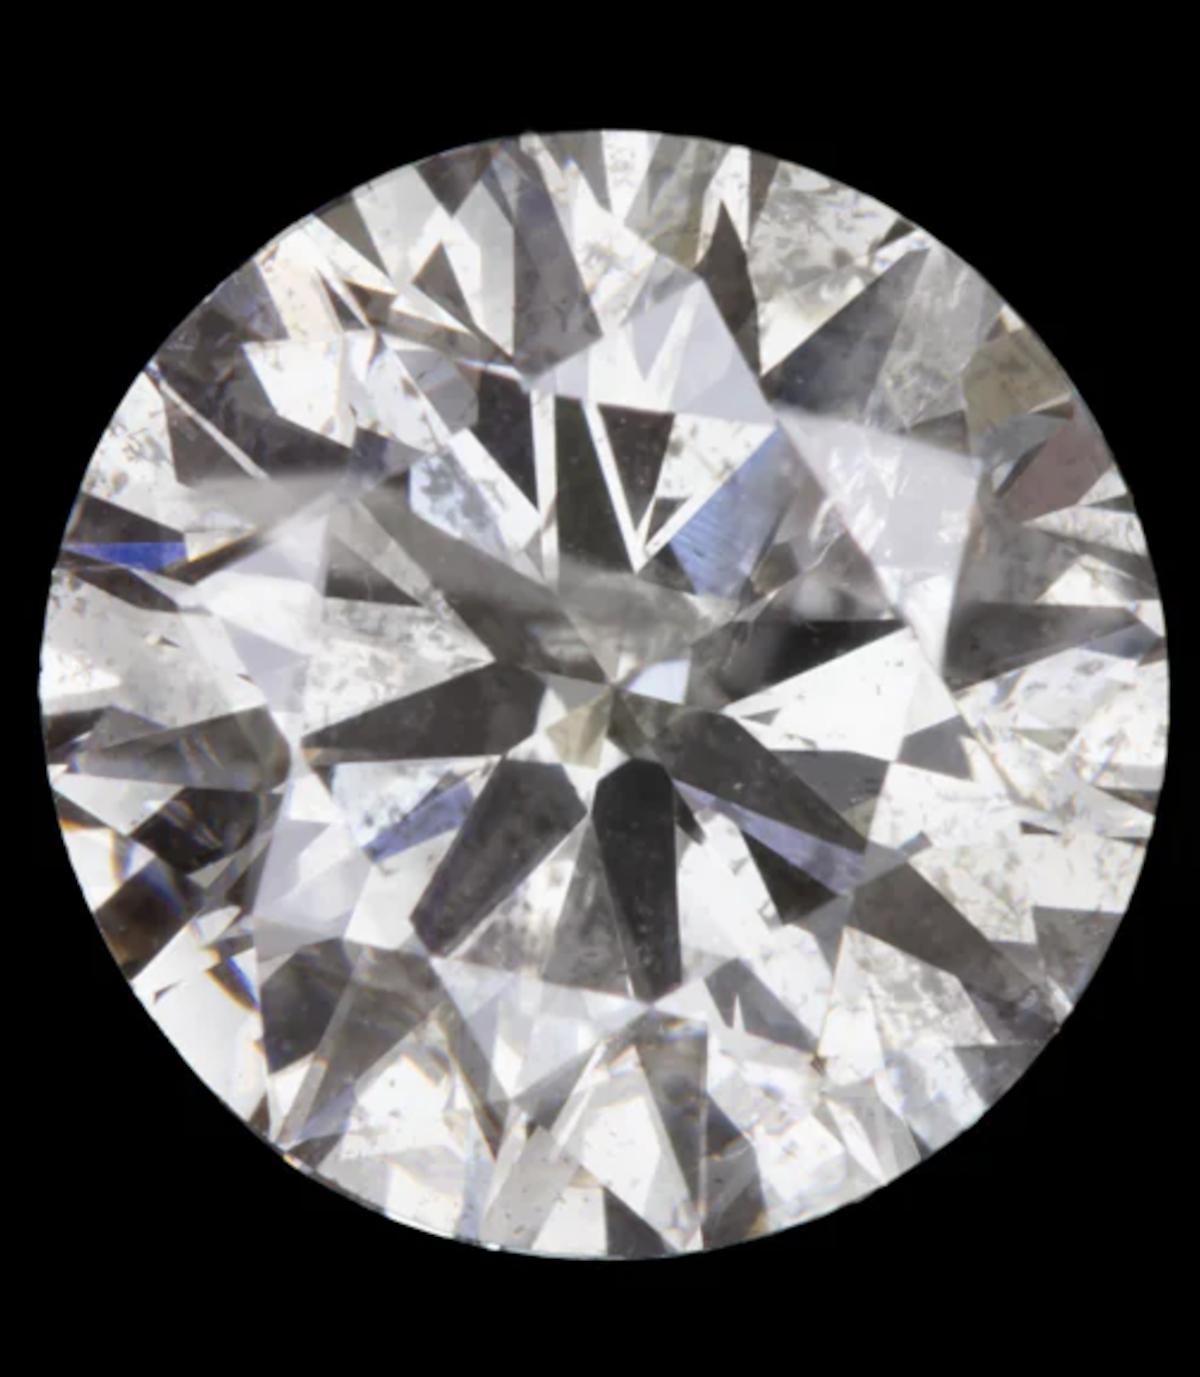 Behold this remarkable pair of round brilliant cut natural diamonds, totaling an impressive 4.02 carats. Their expertly executed cuts result in a vibrant sparkle that captivates the beholder. Offered at a substantial value for their size, these